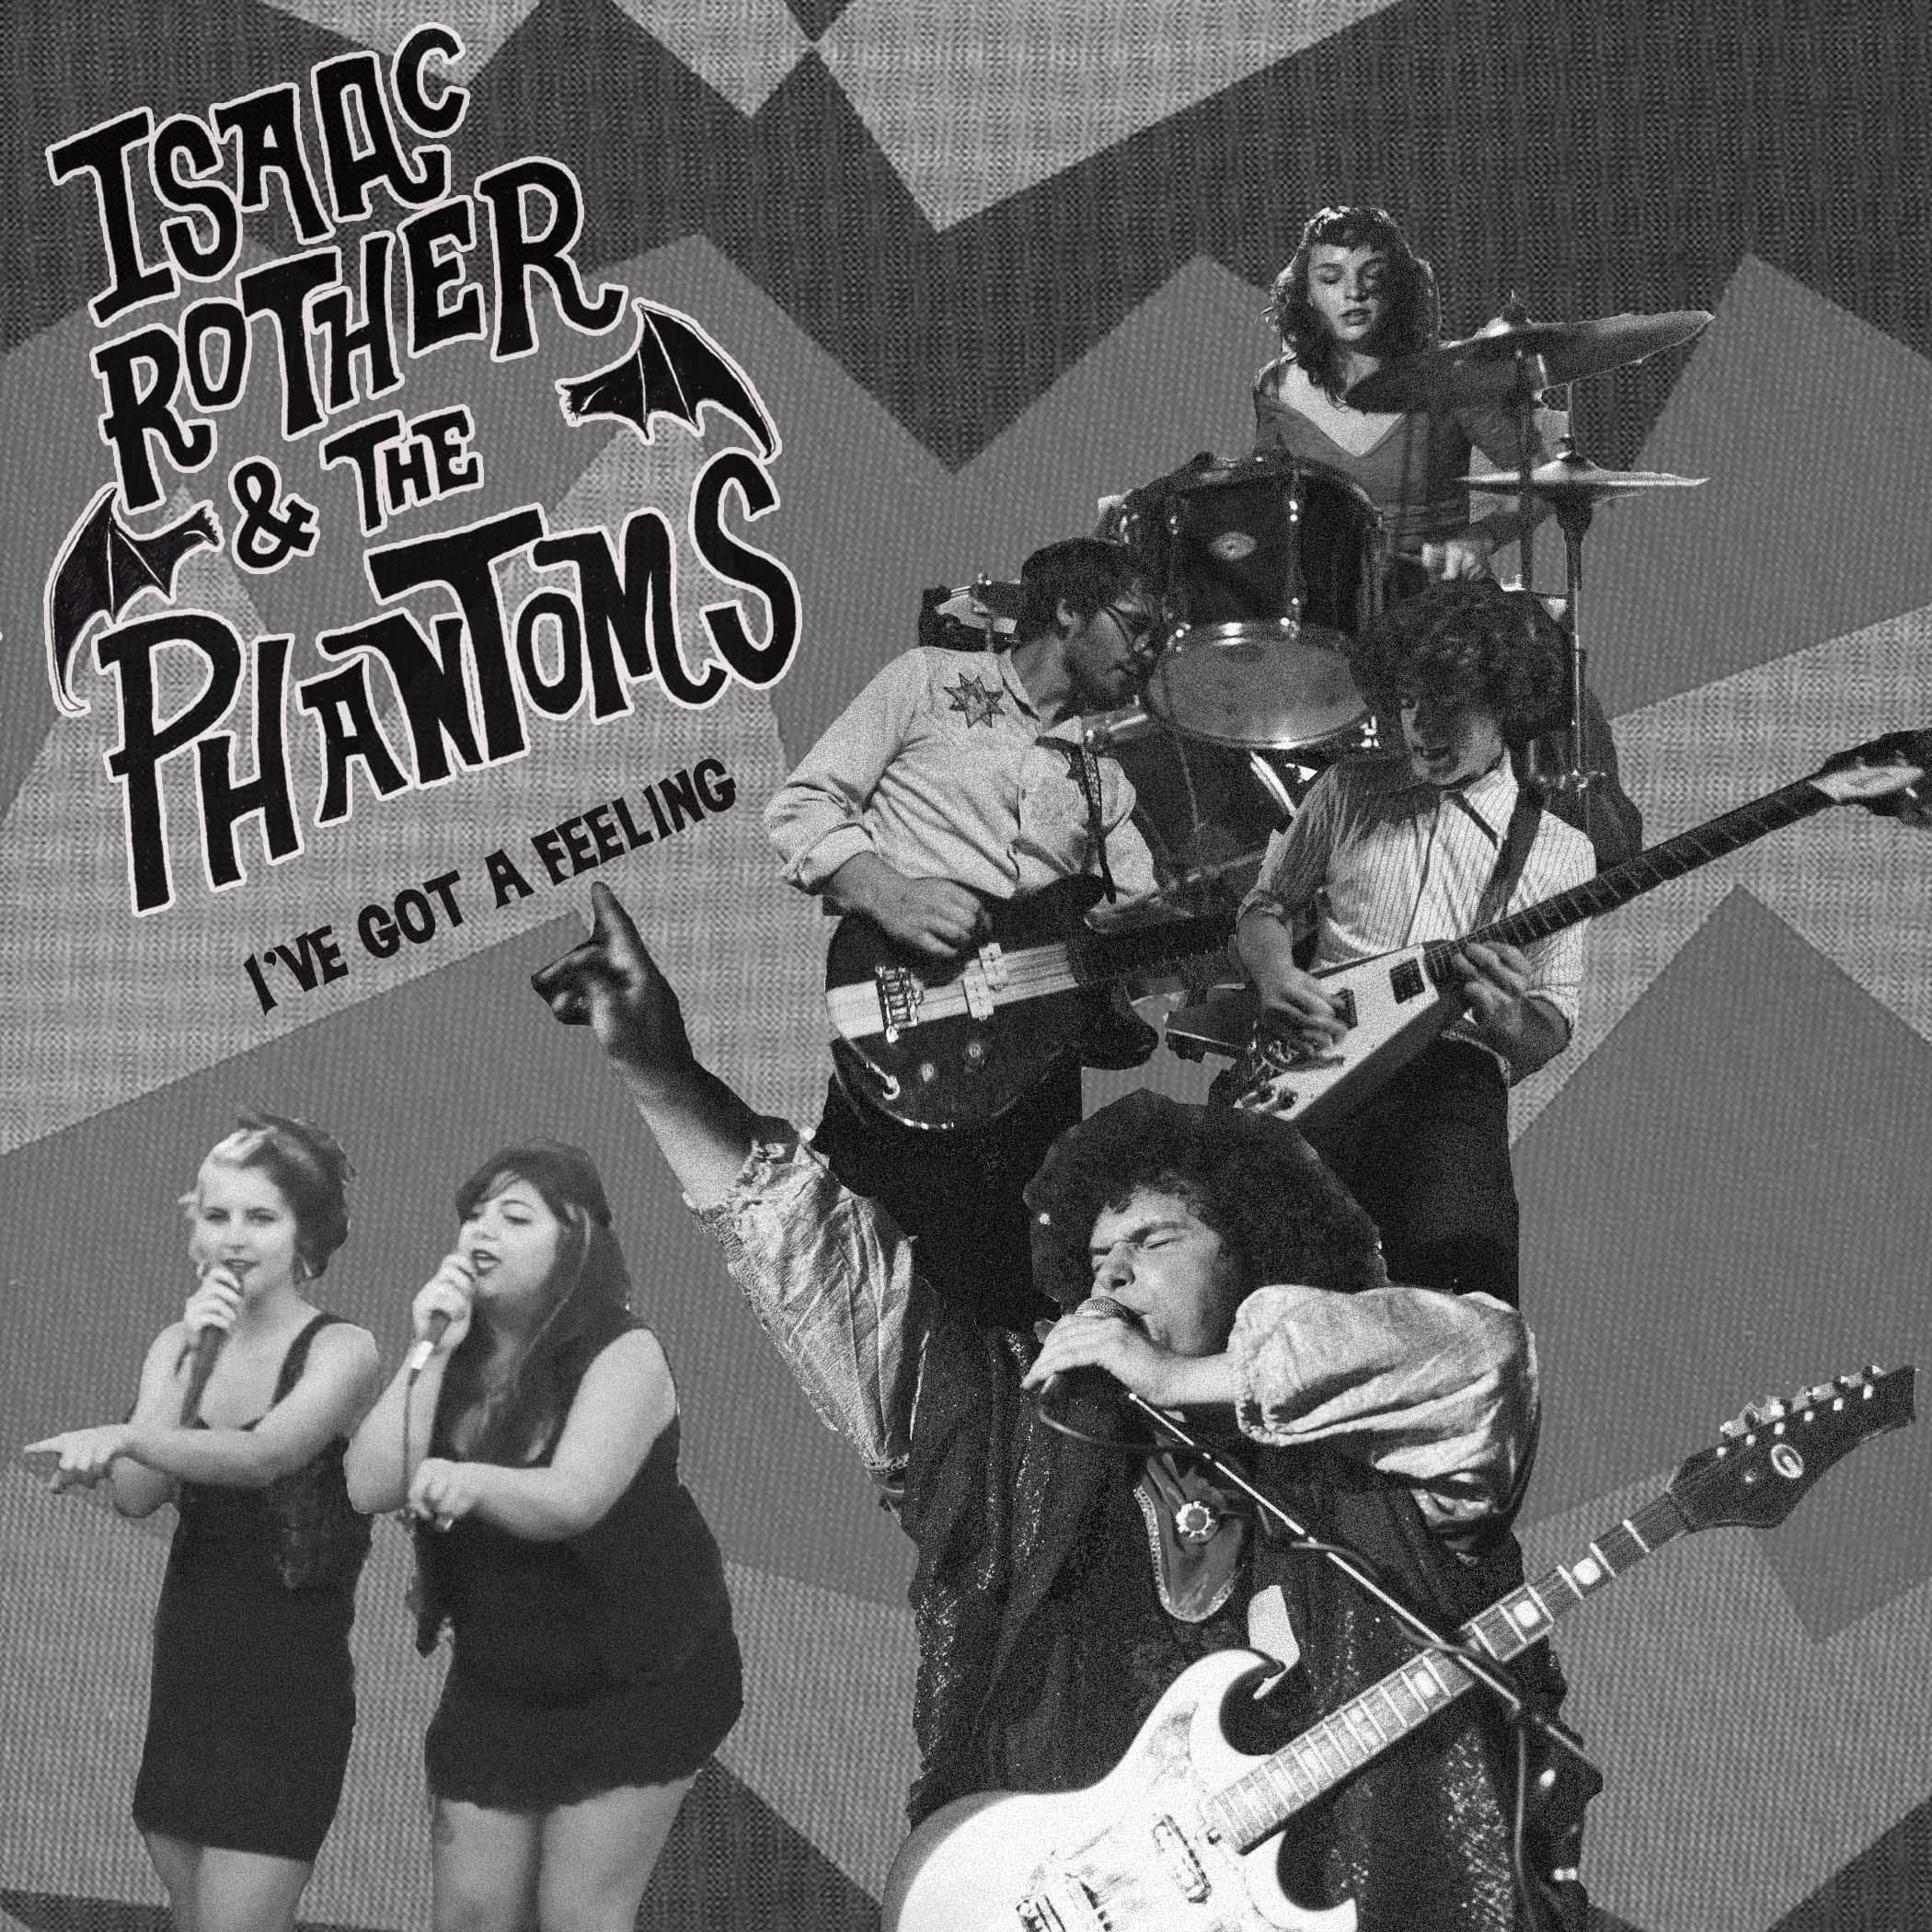 Isaac Rother & The Phantoms- I've Got a Feeling 7"  ~~  BLACK VINYL + DOWNLOAD